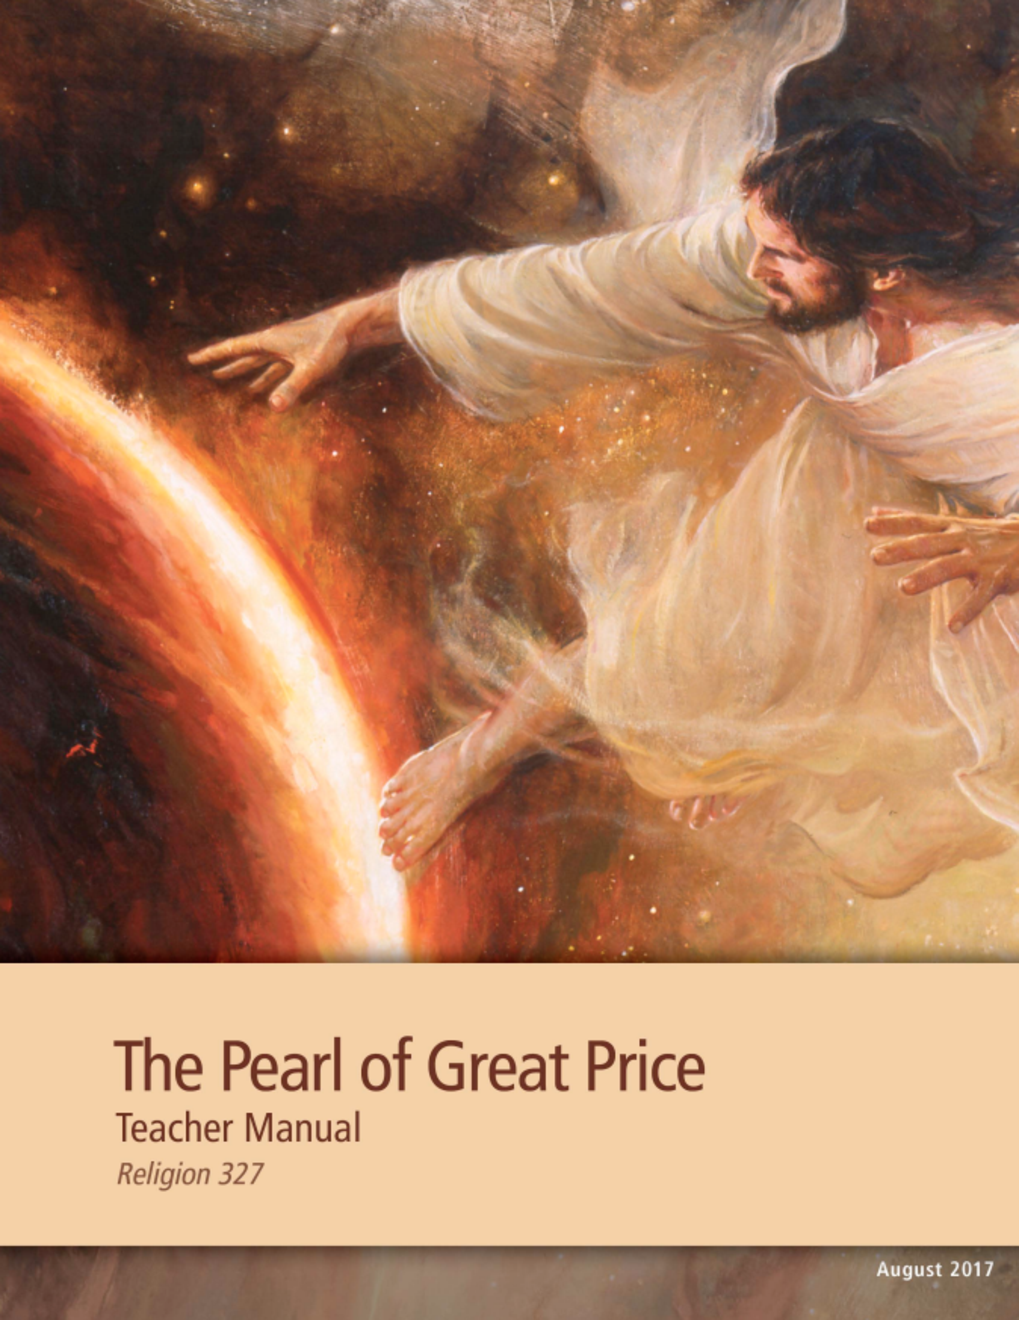 The Pearl of Great Price Teacher Manual (Rel 327)